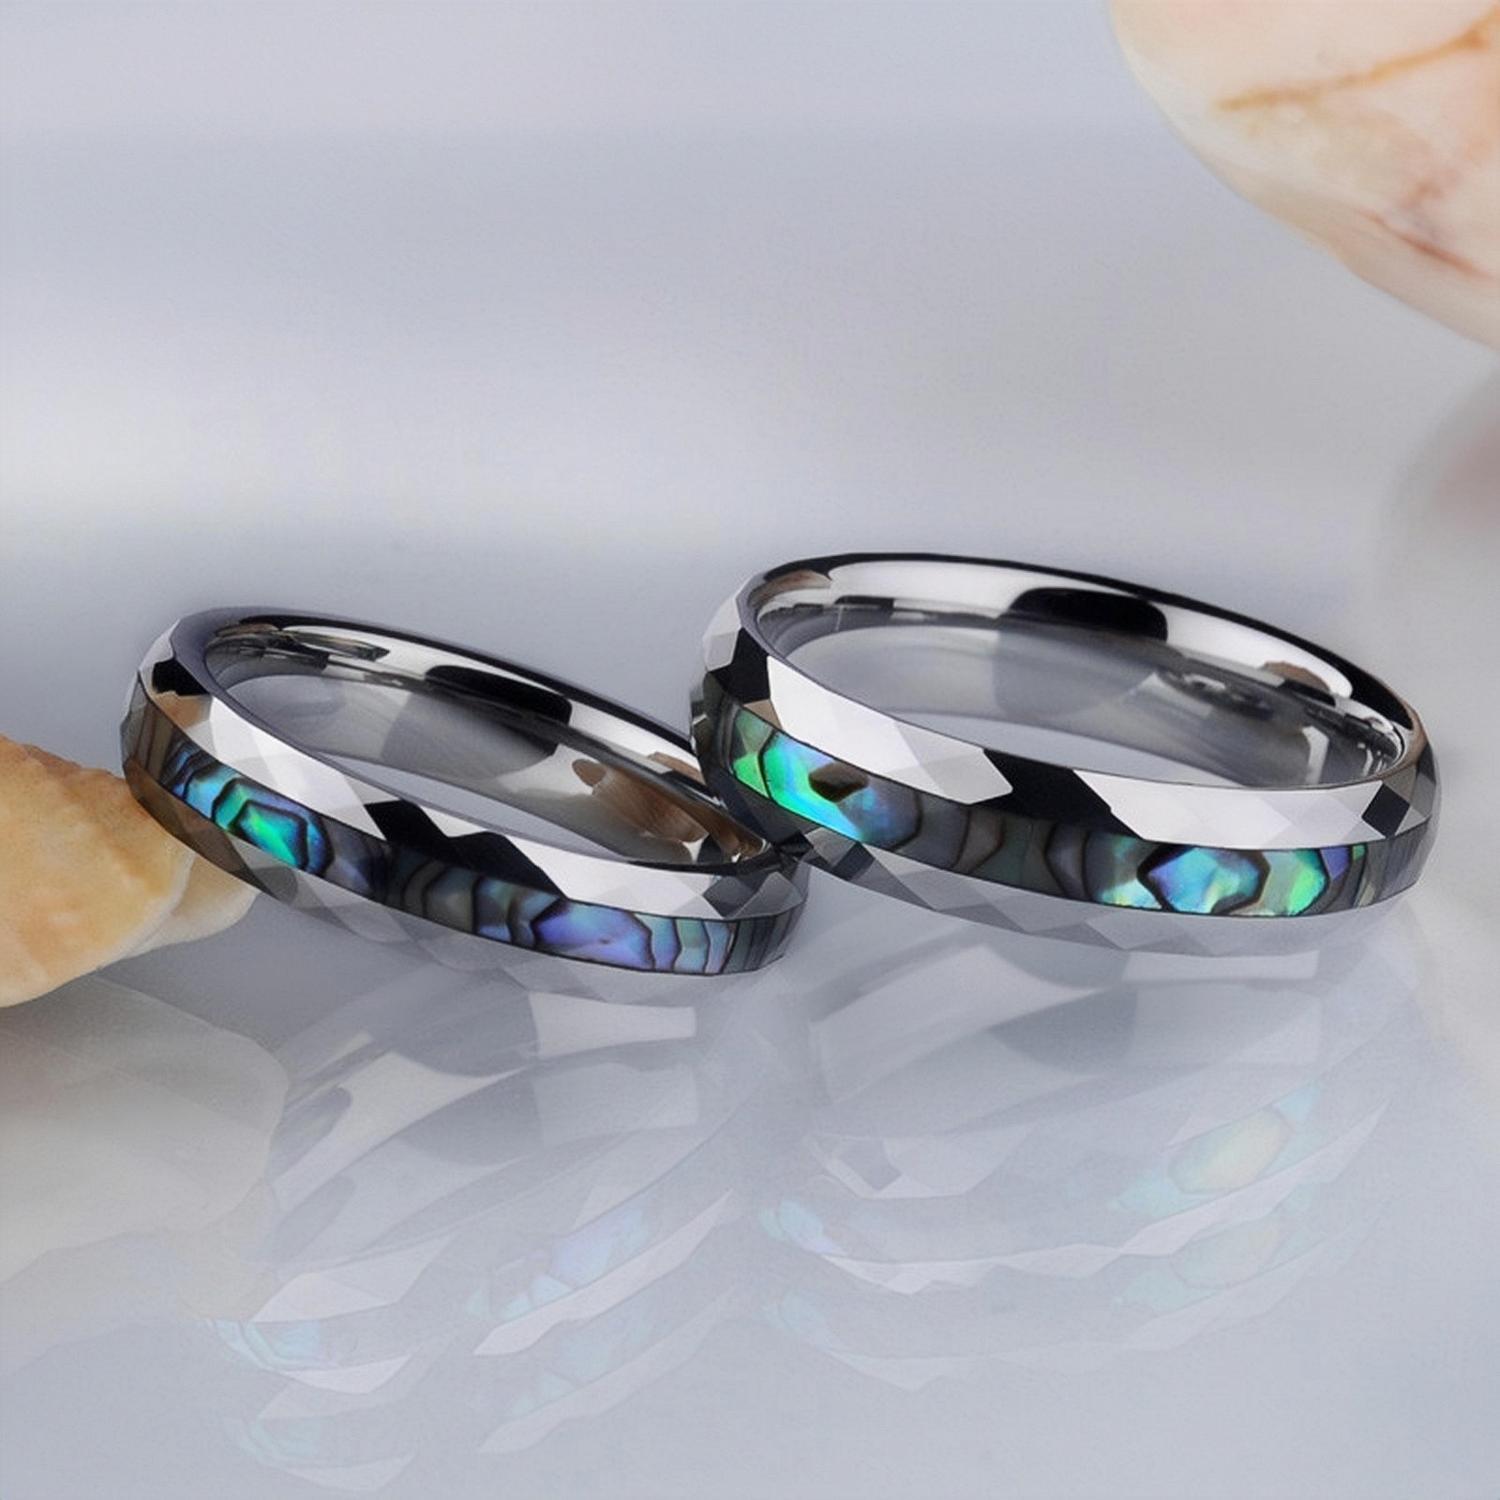 Engravable Unique Shell Rings For Couples In Tungsten - CoupleSets